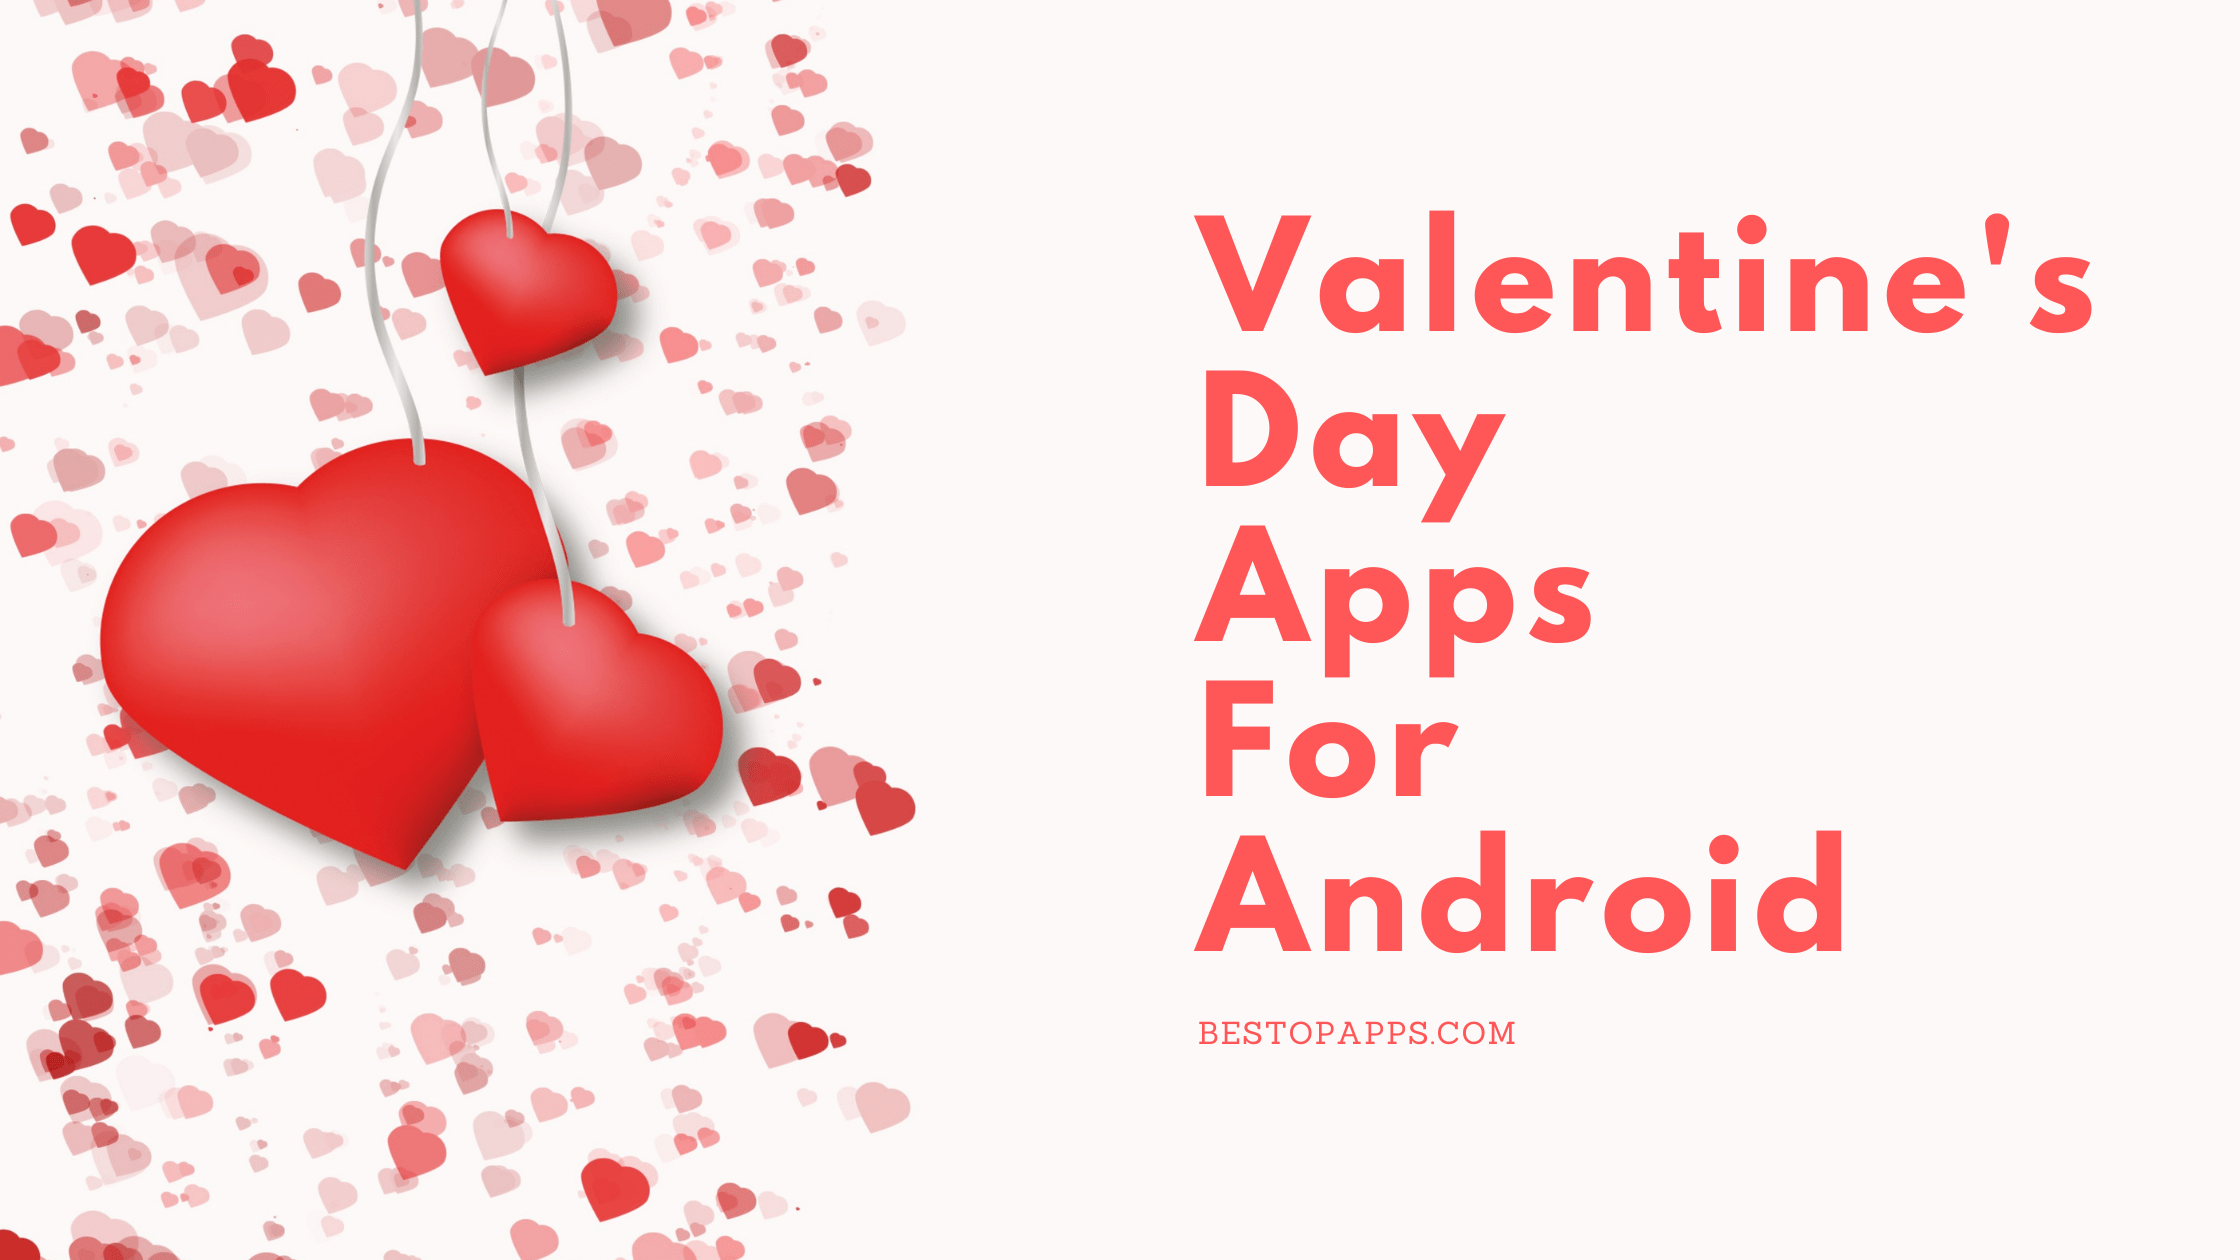 Valentine's Day Apps for Android